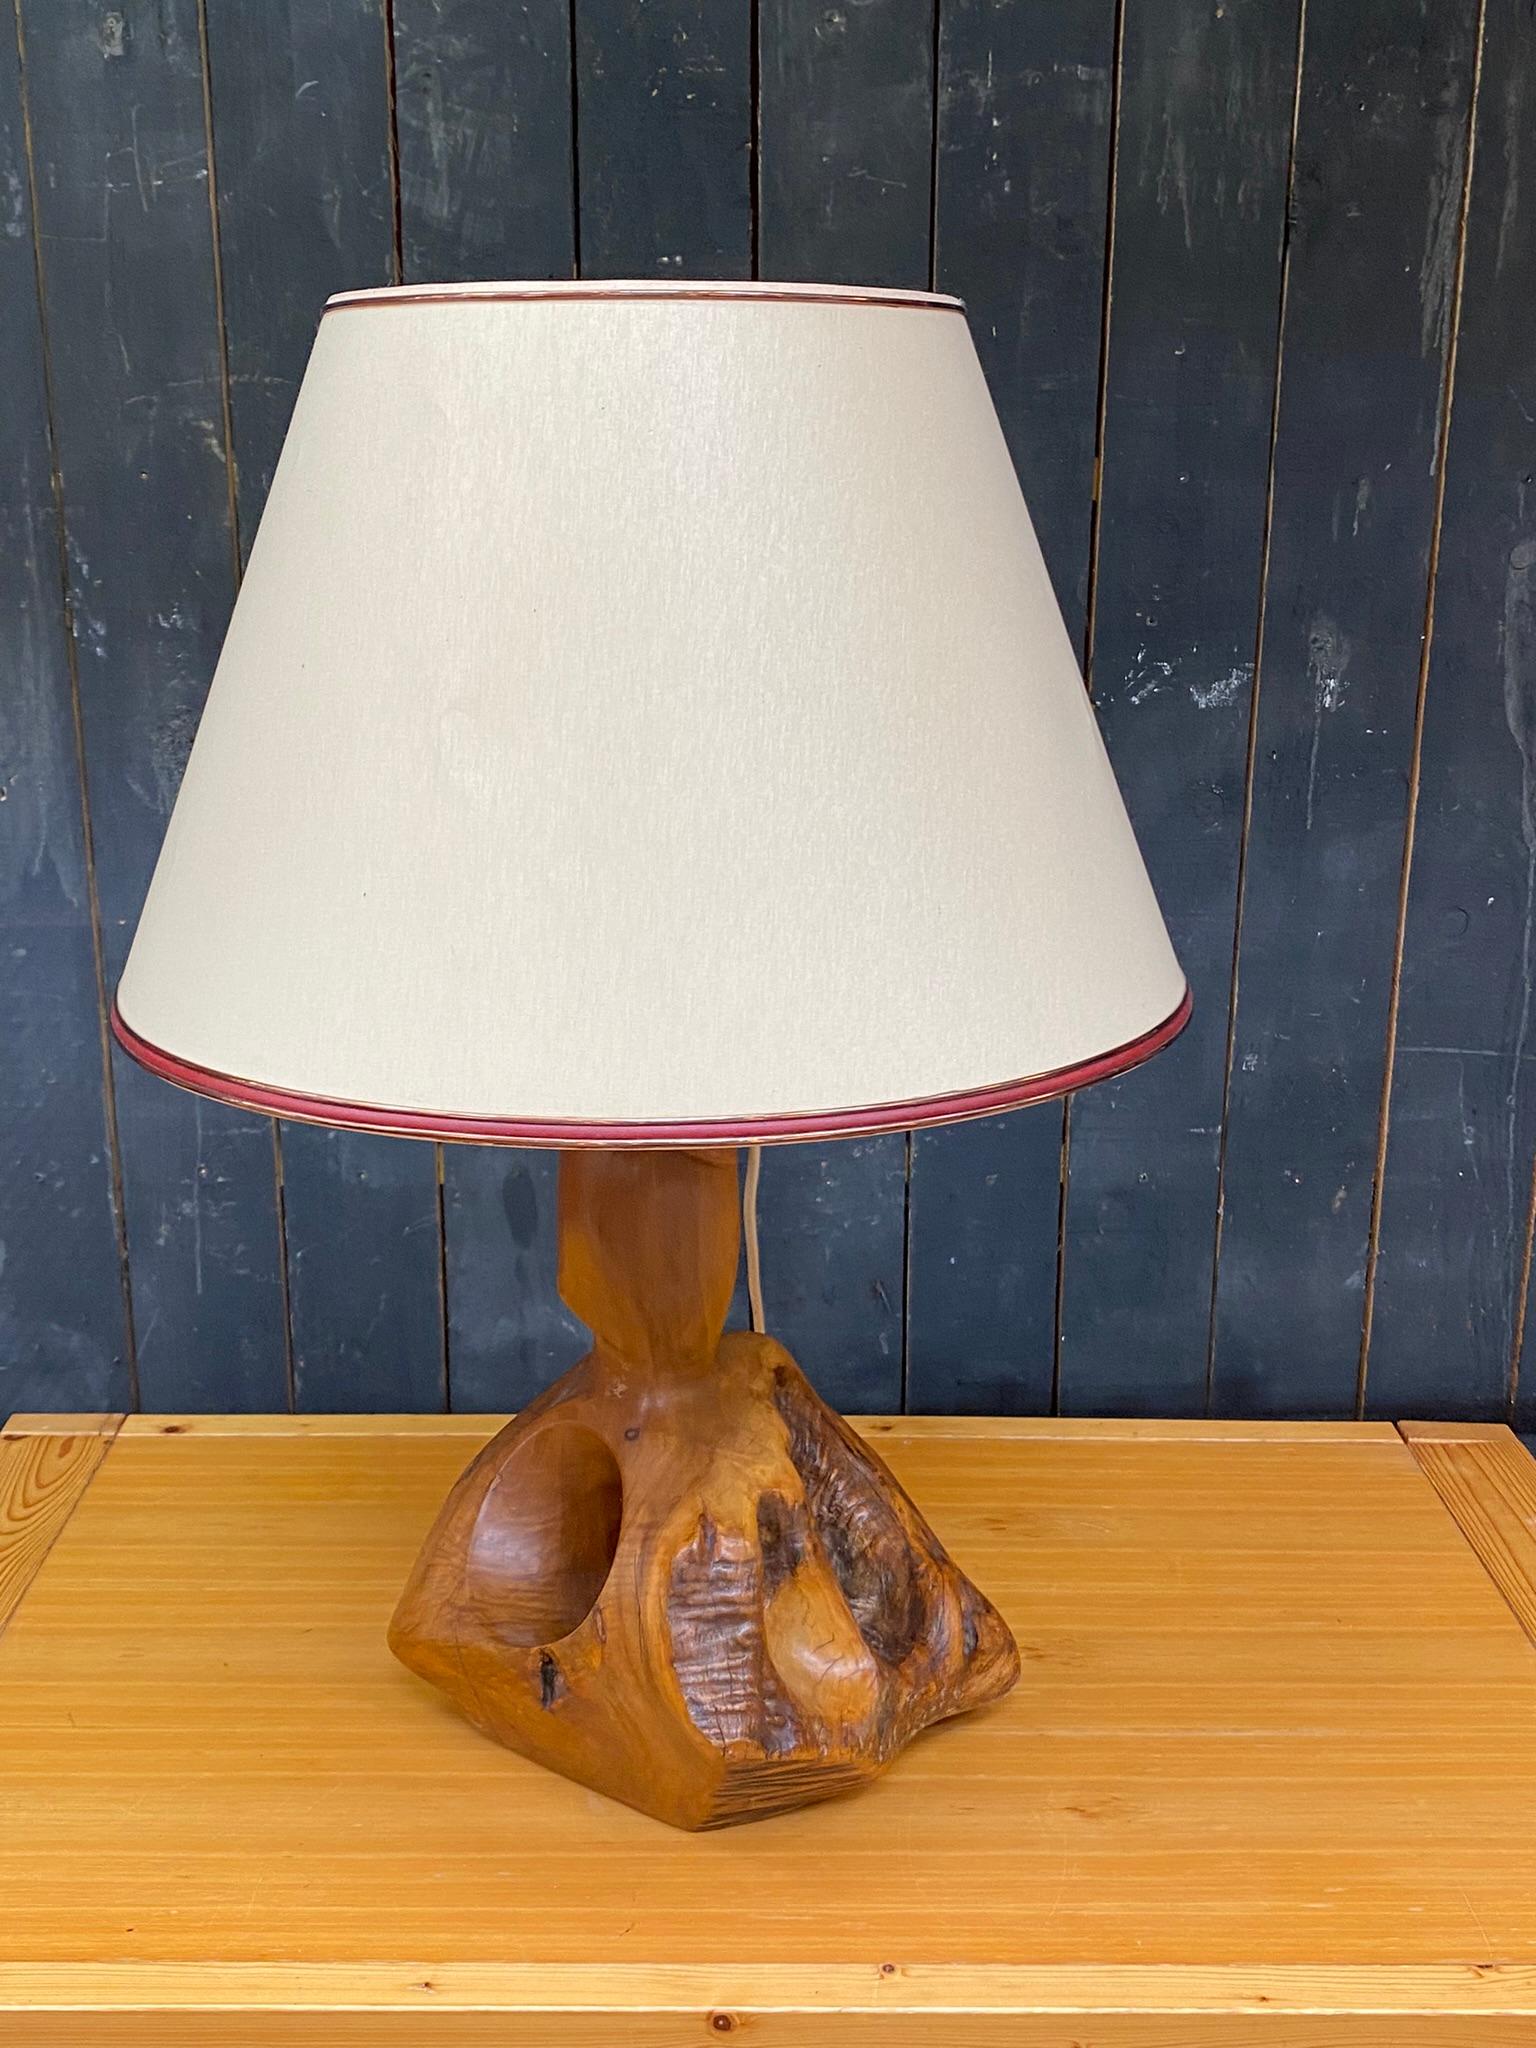 organic lamp in solid wood, direct carving, circa 1970
height lamp only: 52 cm (20,47